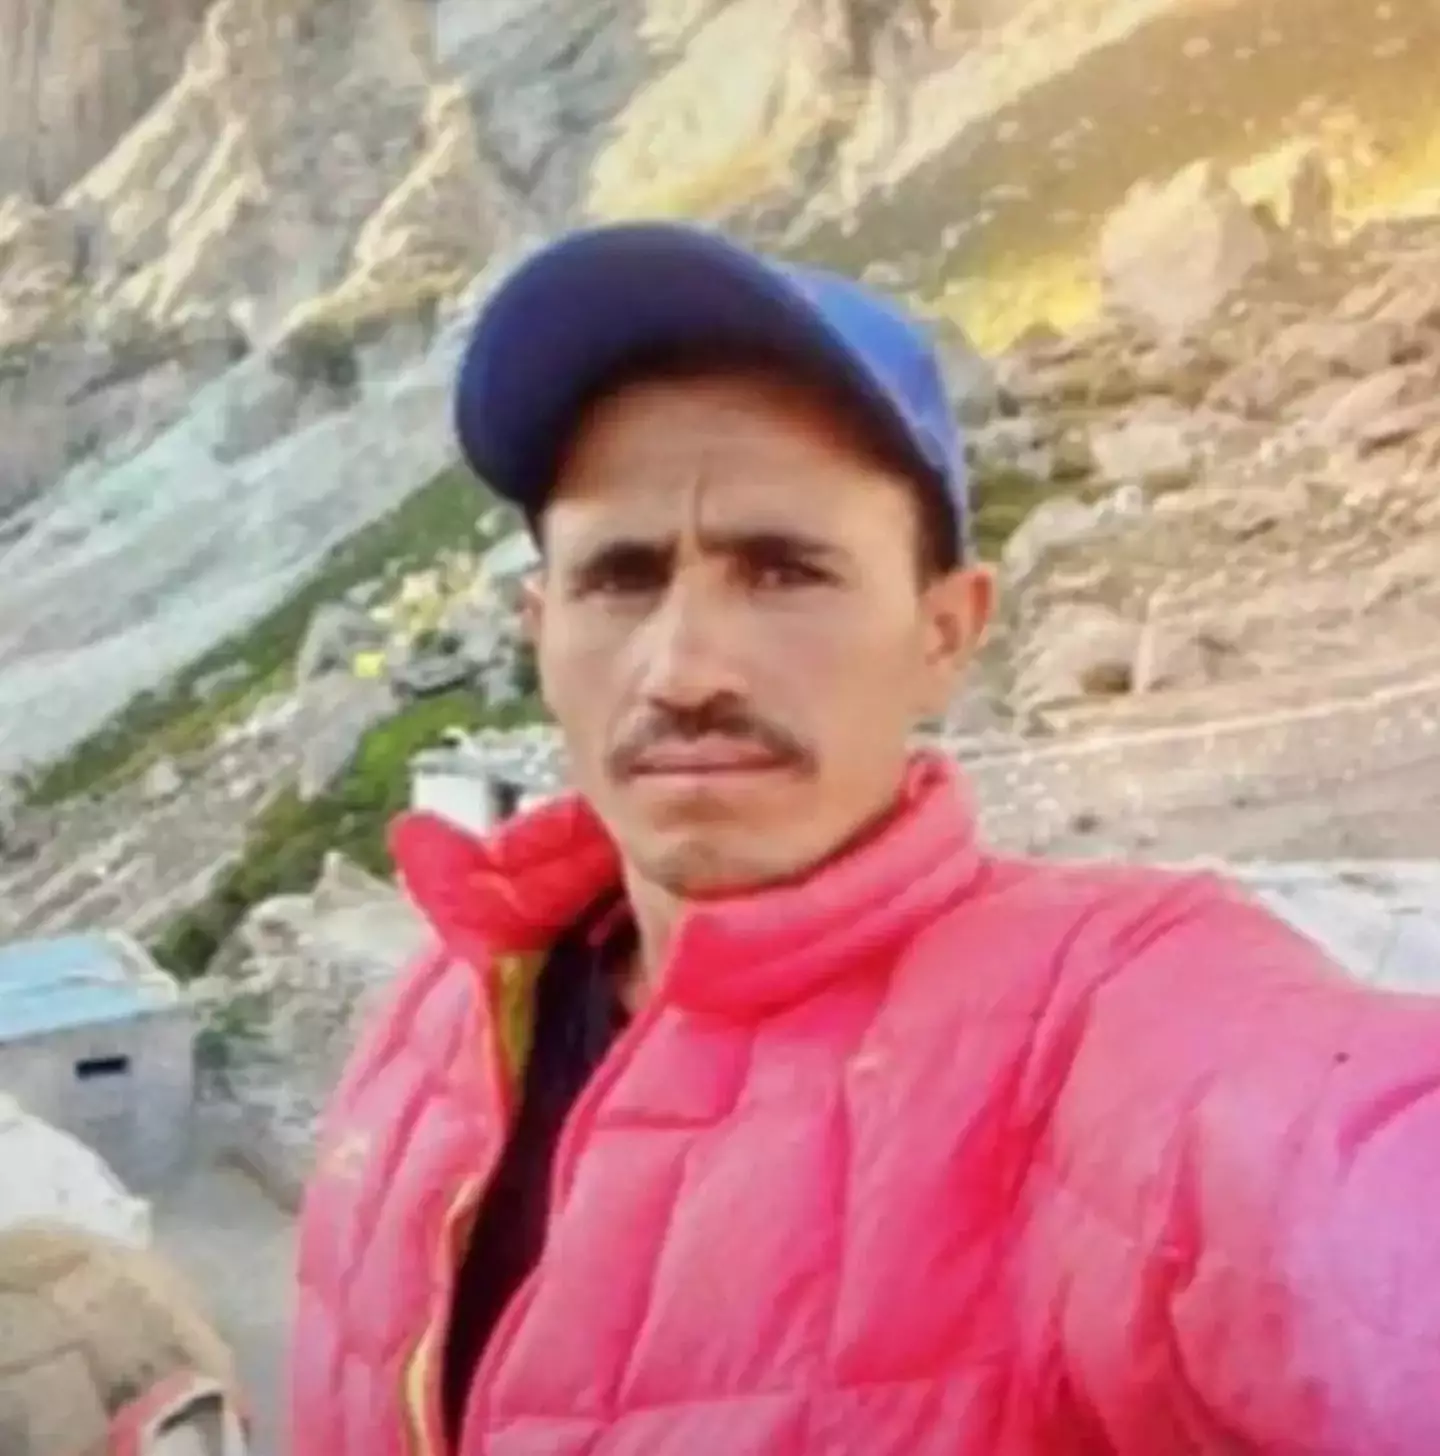 Mohammad Hassan lost his life on K2.